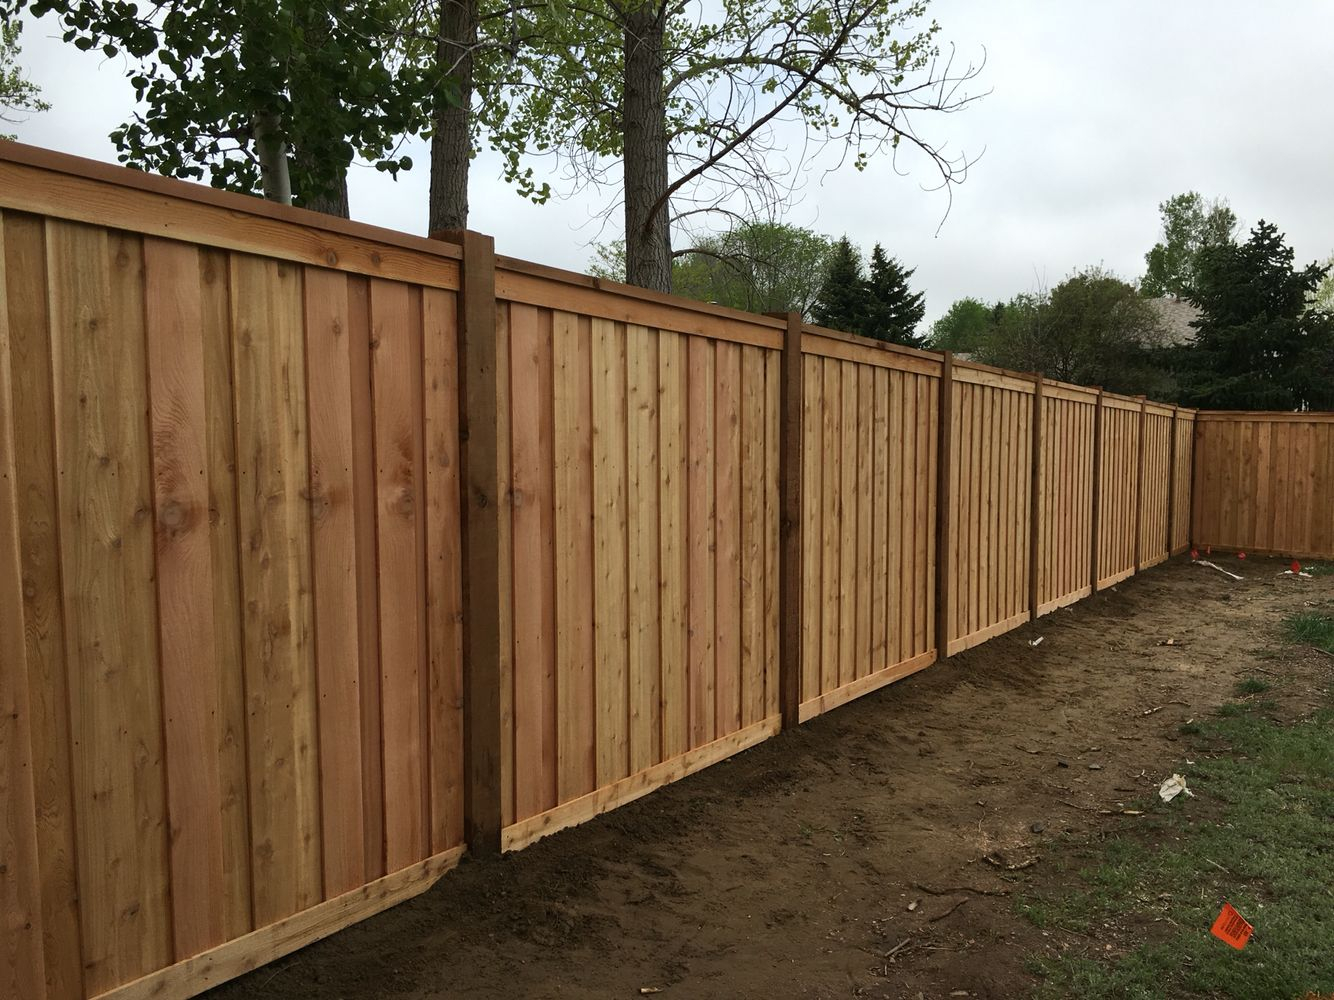 7 Tall Cedar Privacy Fence With 6x6 Posts 2x6 Top Cap 6 within sizing 1334 X 1000